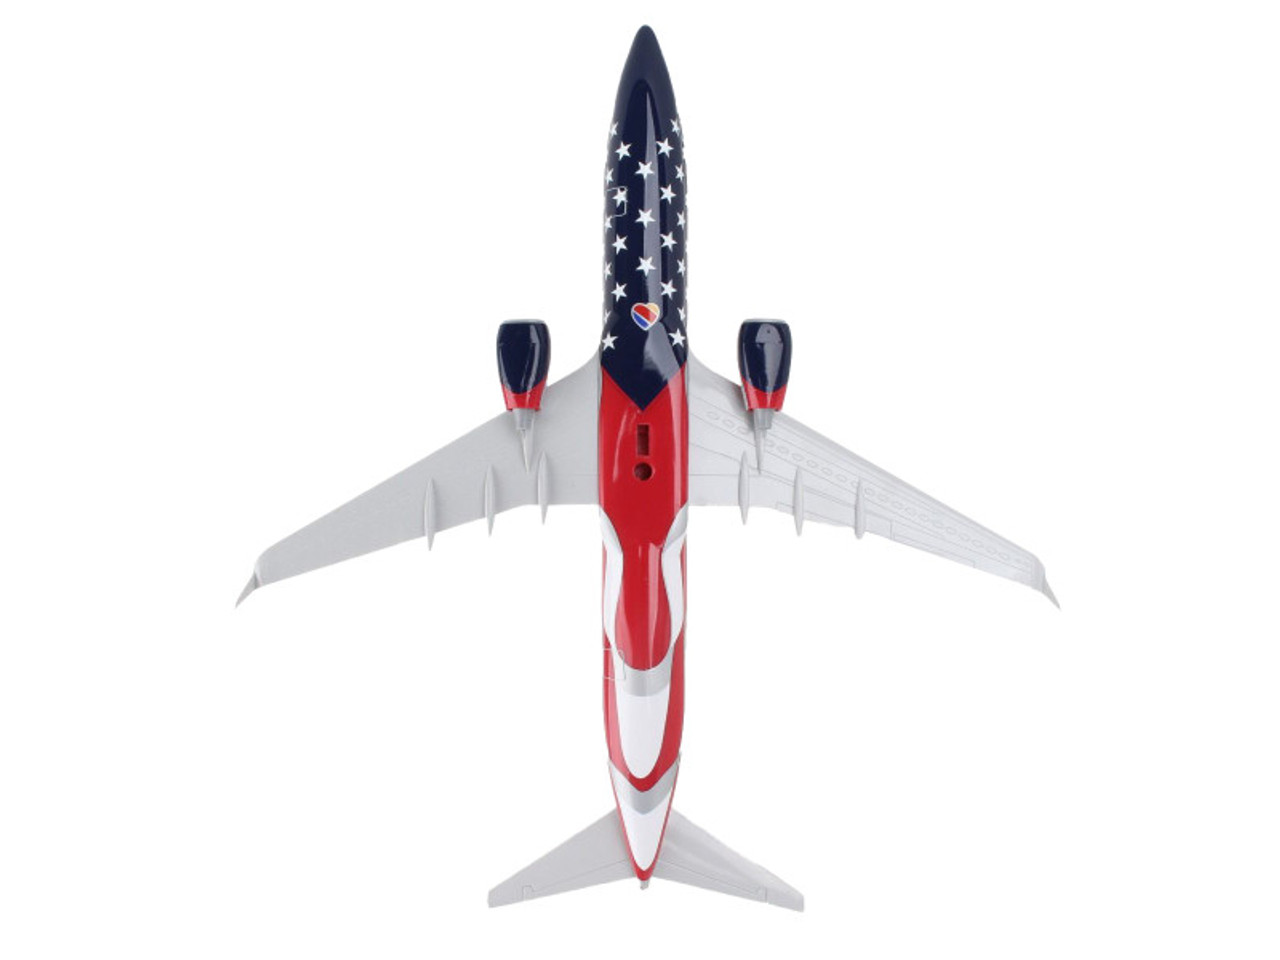 Boeing 737-800 Commercial Aircraft "Southwest Airlines - Freedom One" (N500WR) USA Flag Livery (Snap-Fit) 1/130 Plastic Model by Skymarks